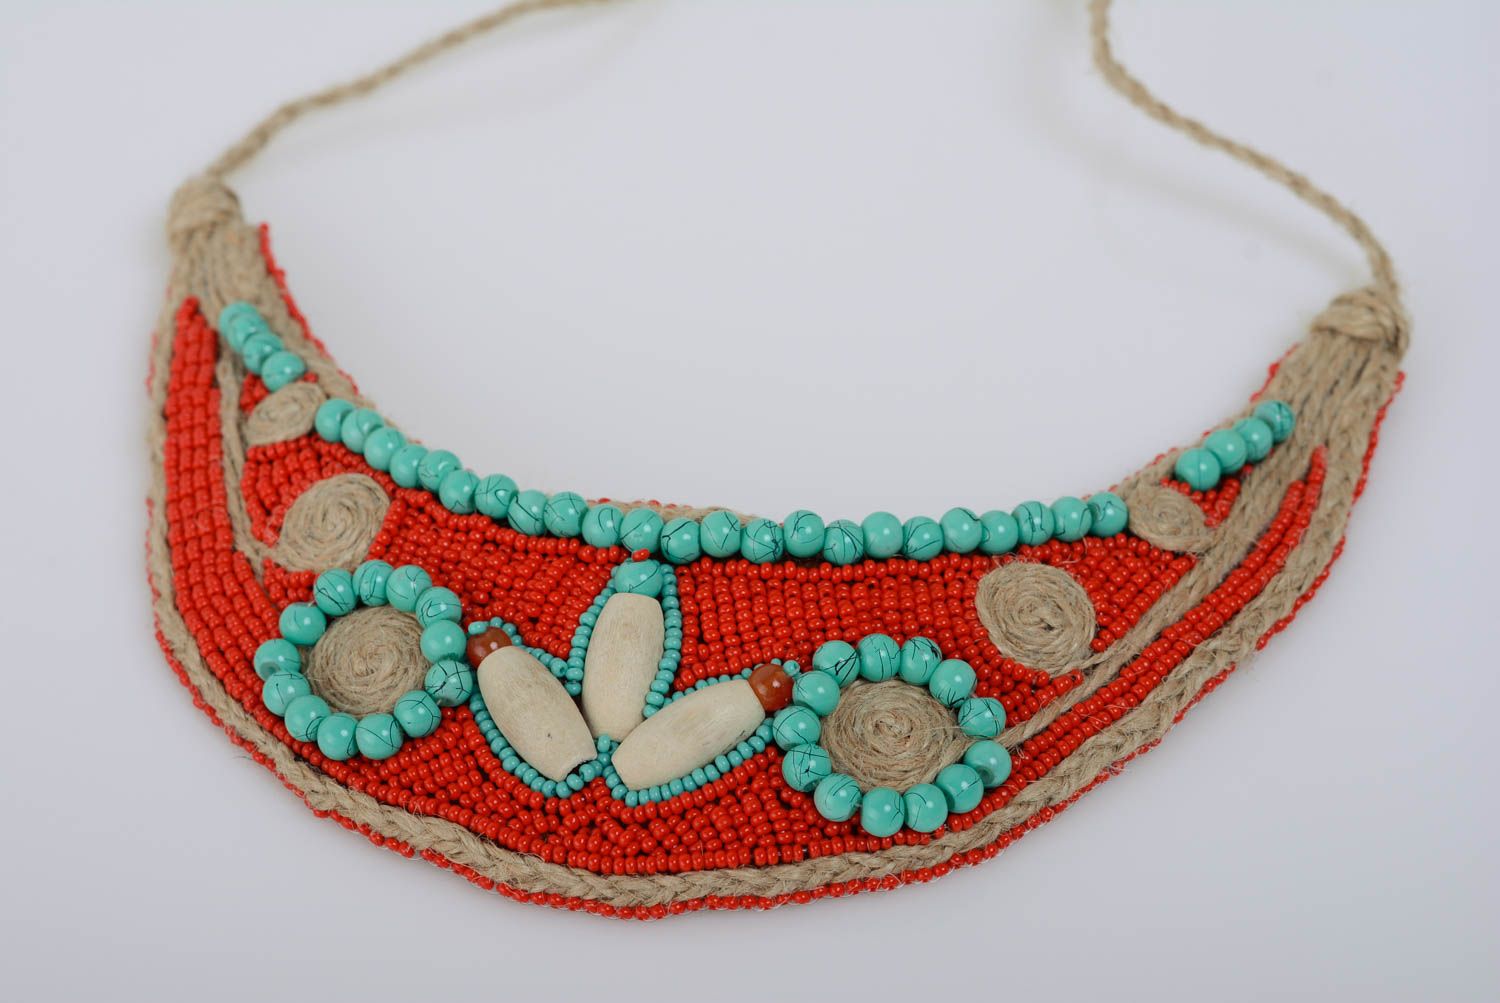 Handmade bead embroidered necklace with natural stones in turquoise and red colors photo 5